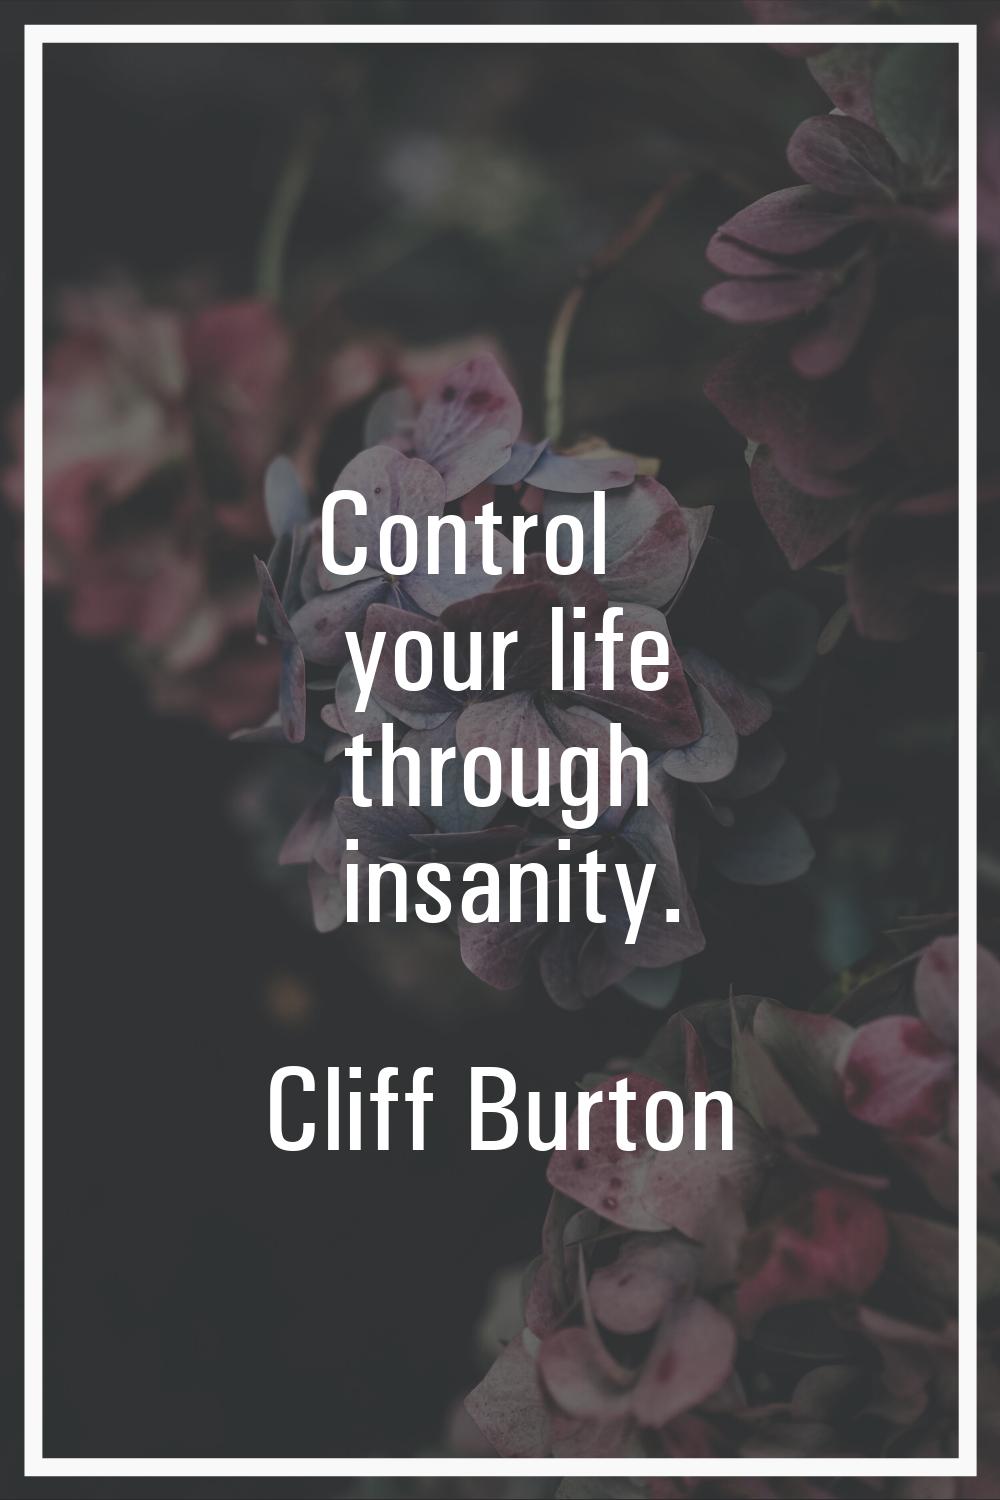 Control your life through insanity.